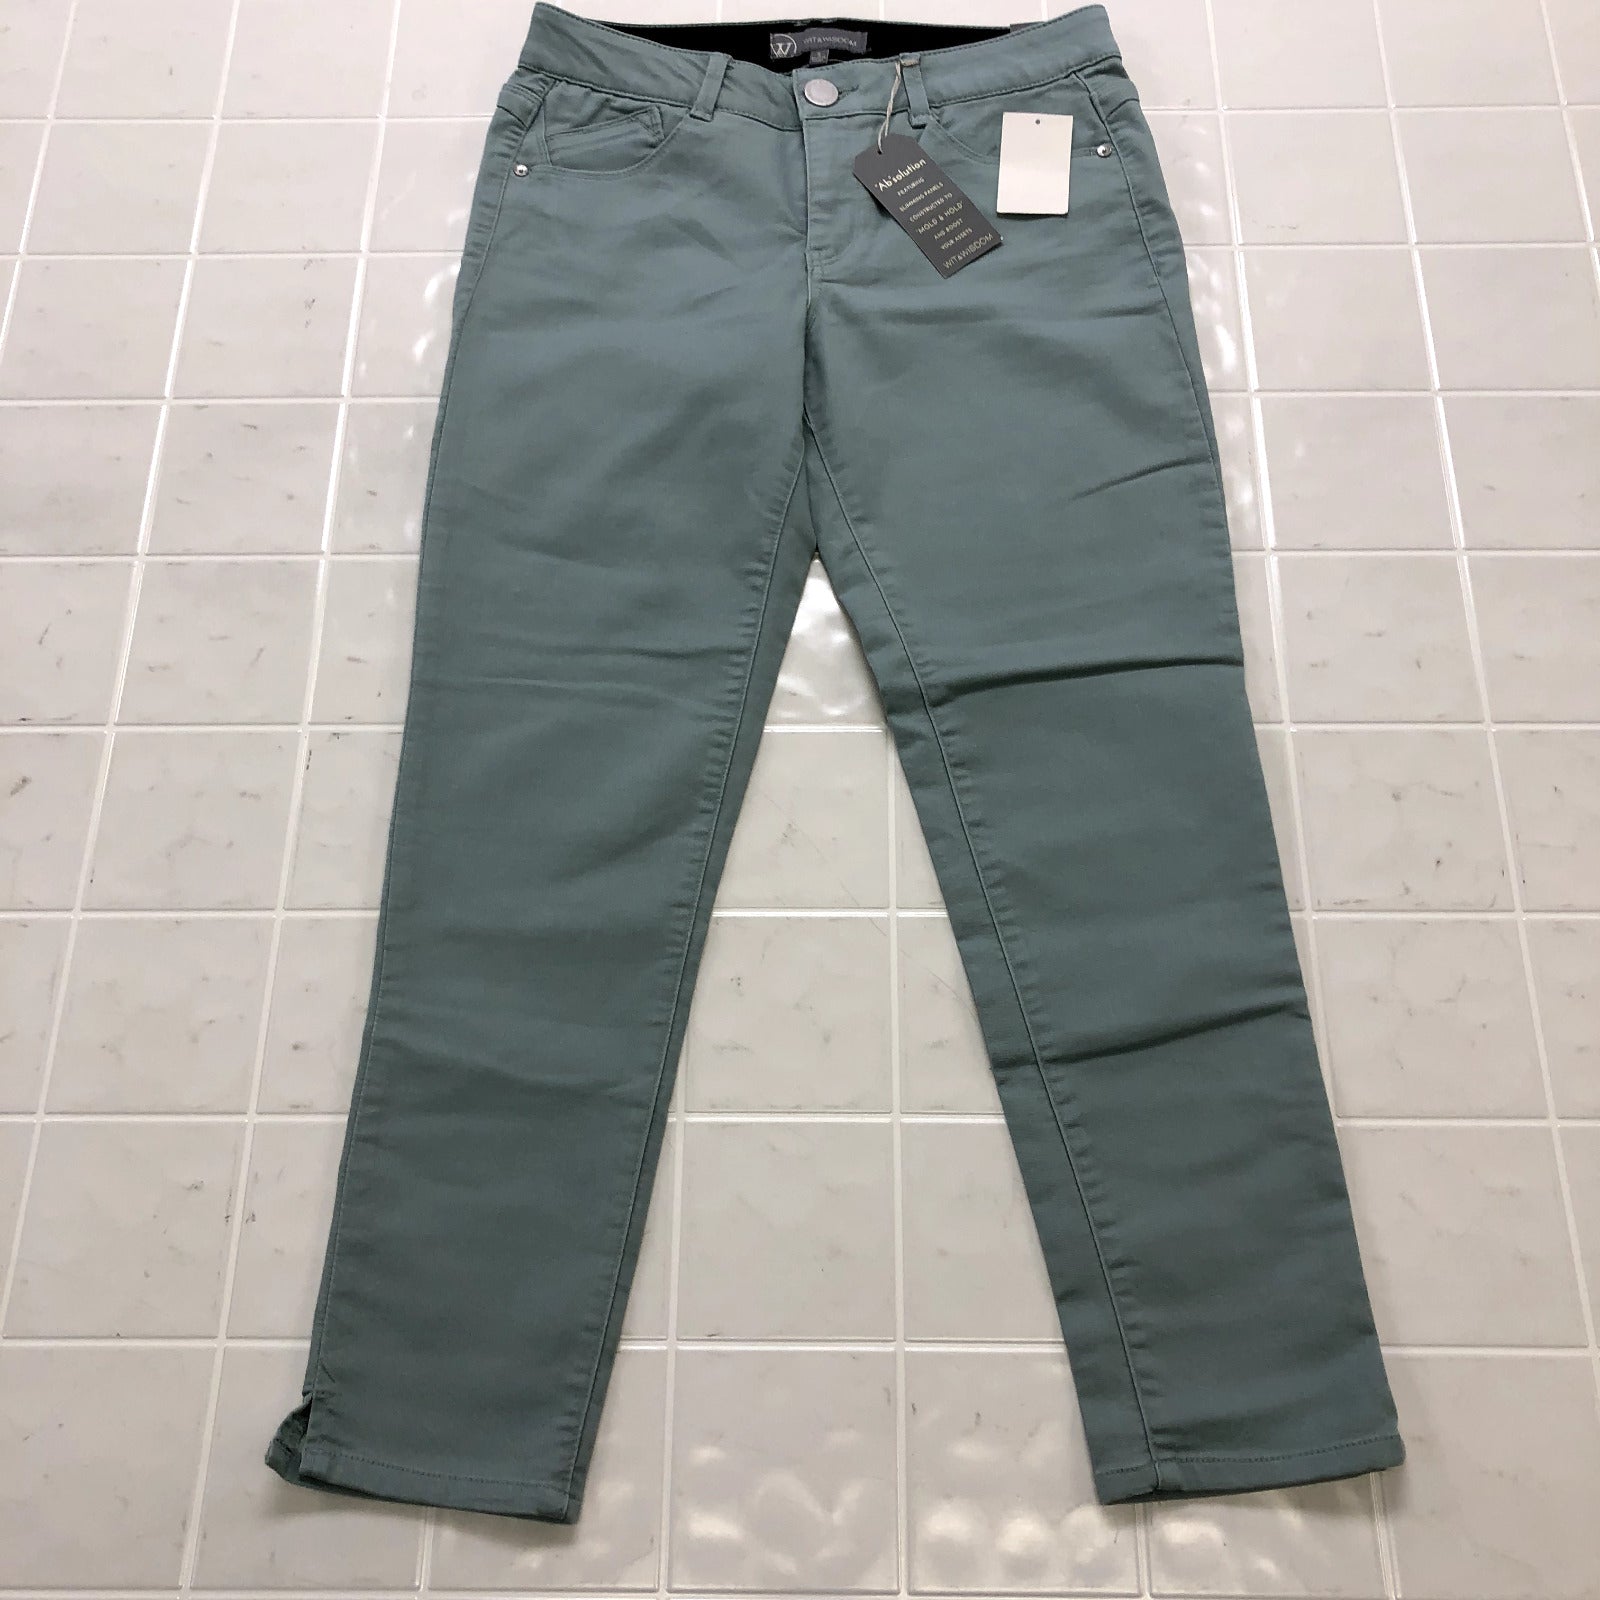 NEW Wit & Wisdom Green Flat Front Tapered Chino Stretch Jeans Women's Size 8